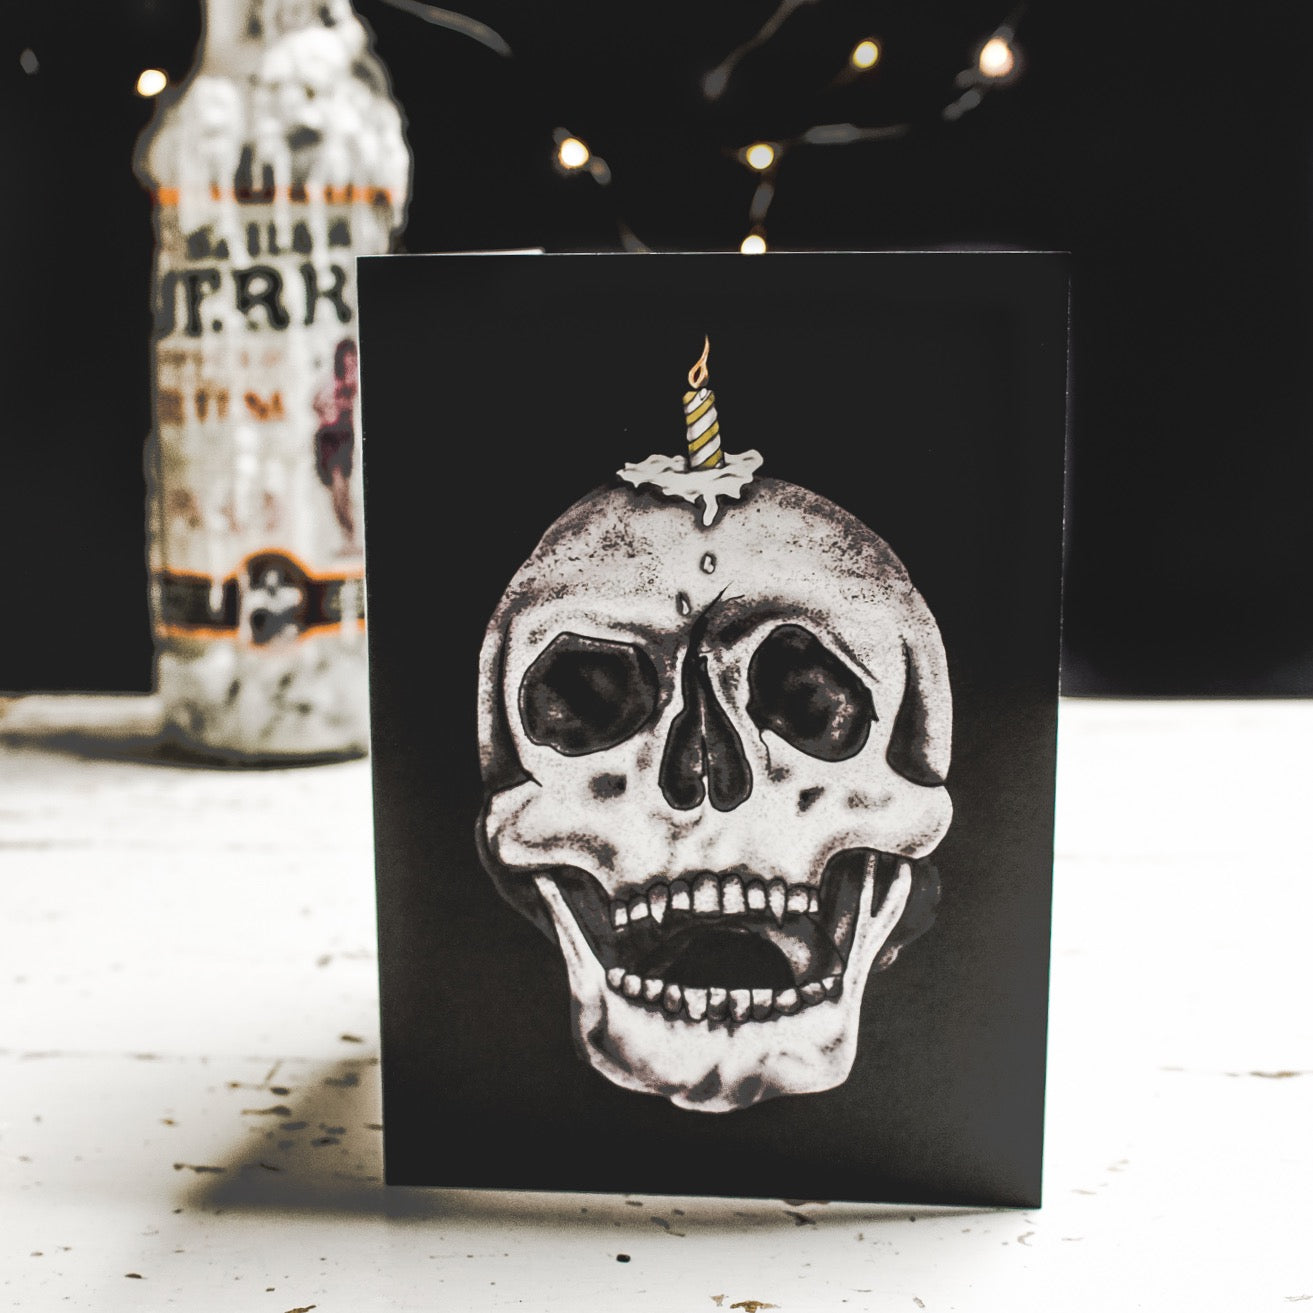 Black Birthday Card With Skull Illustration with melting candle on its head by Wayward